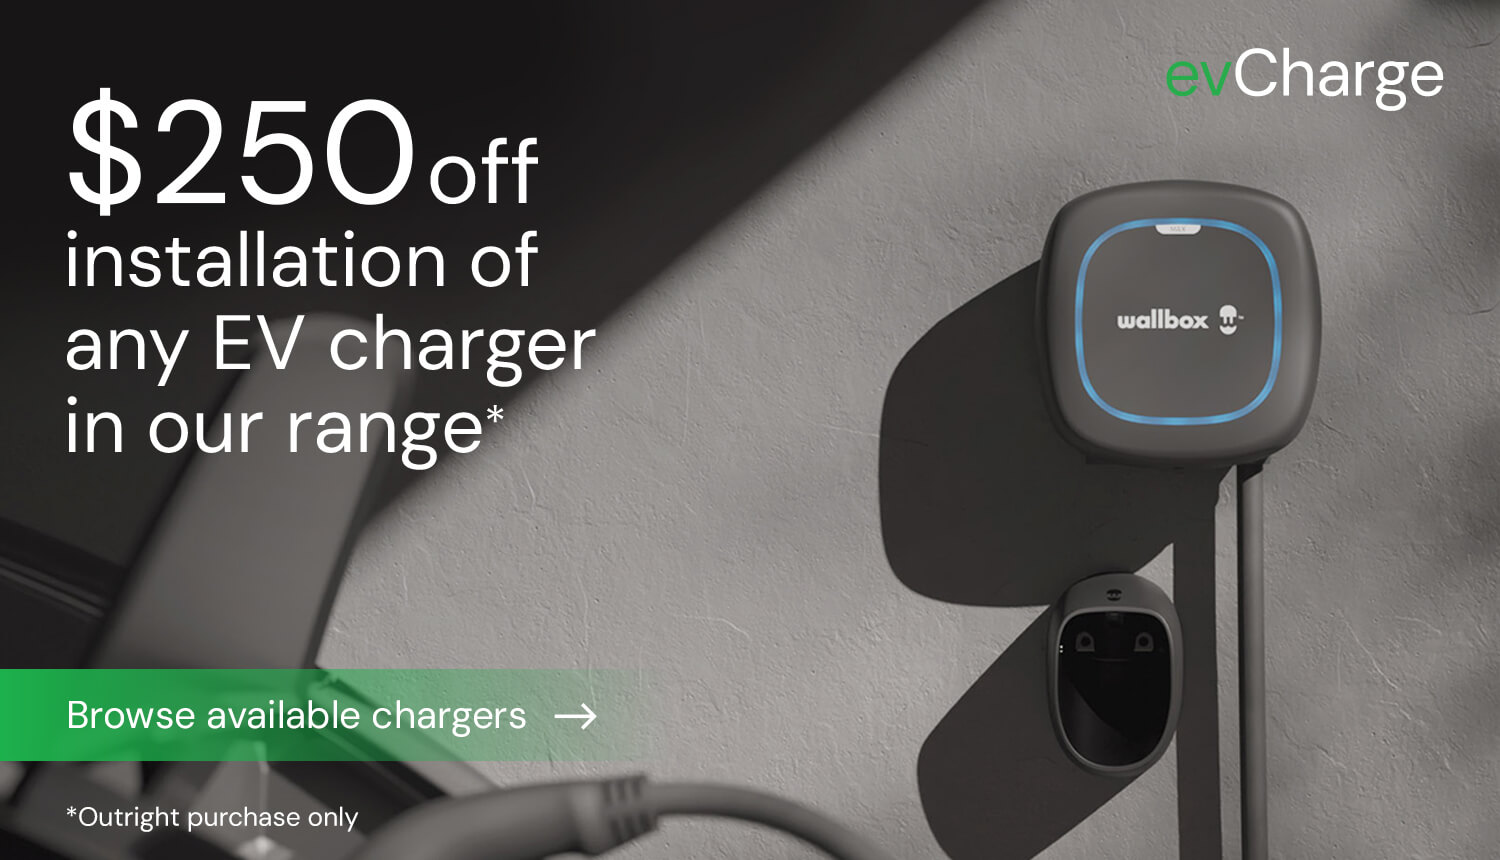 ActewAGL evHub | $250 off installation of any EV charger in our range